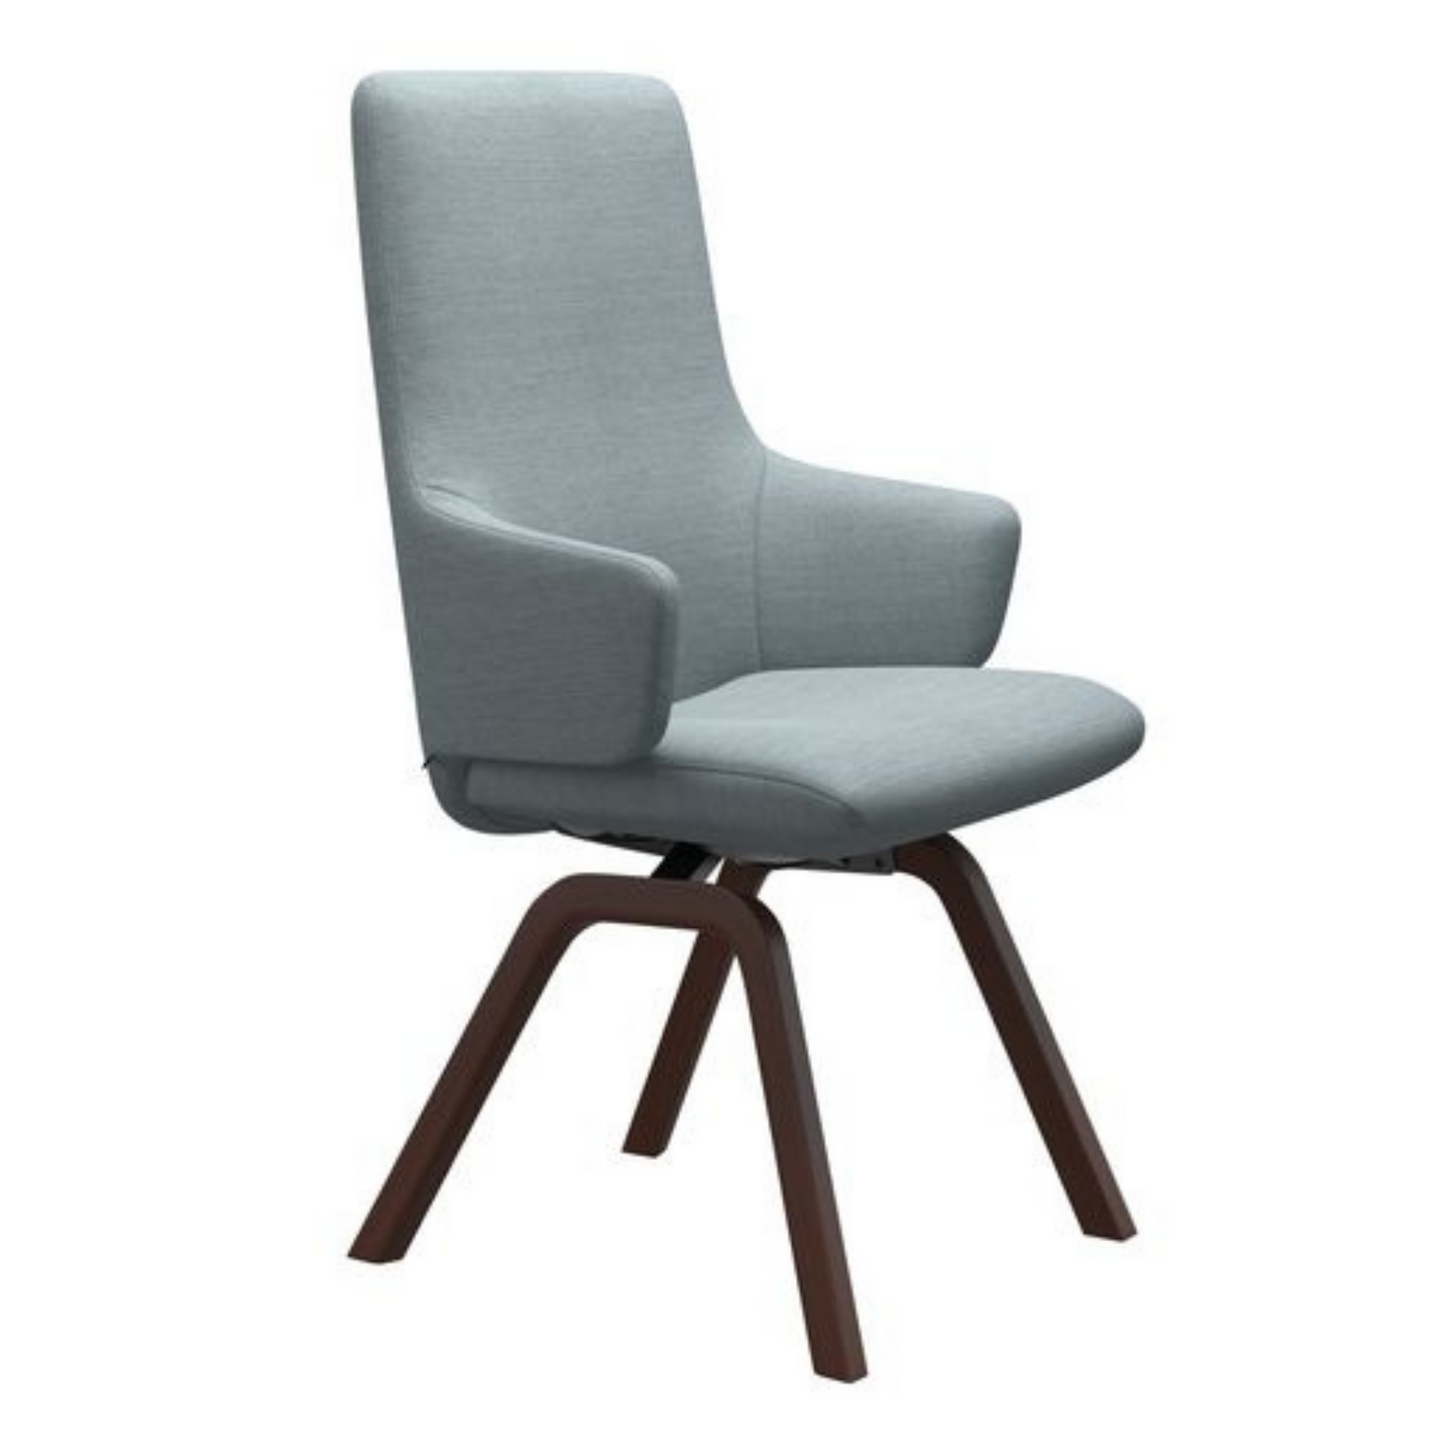 Laurel Dining Chair with Arms D200 Leg by Stressless